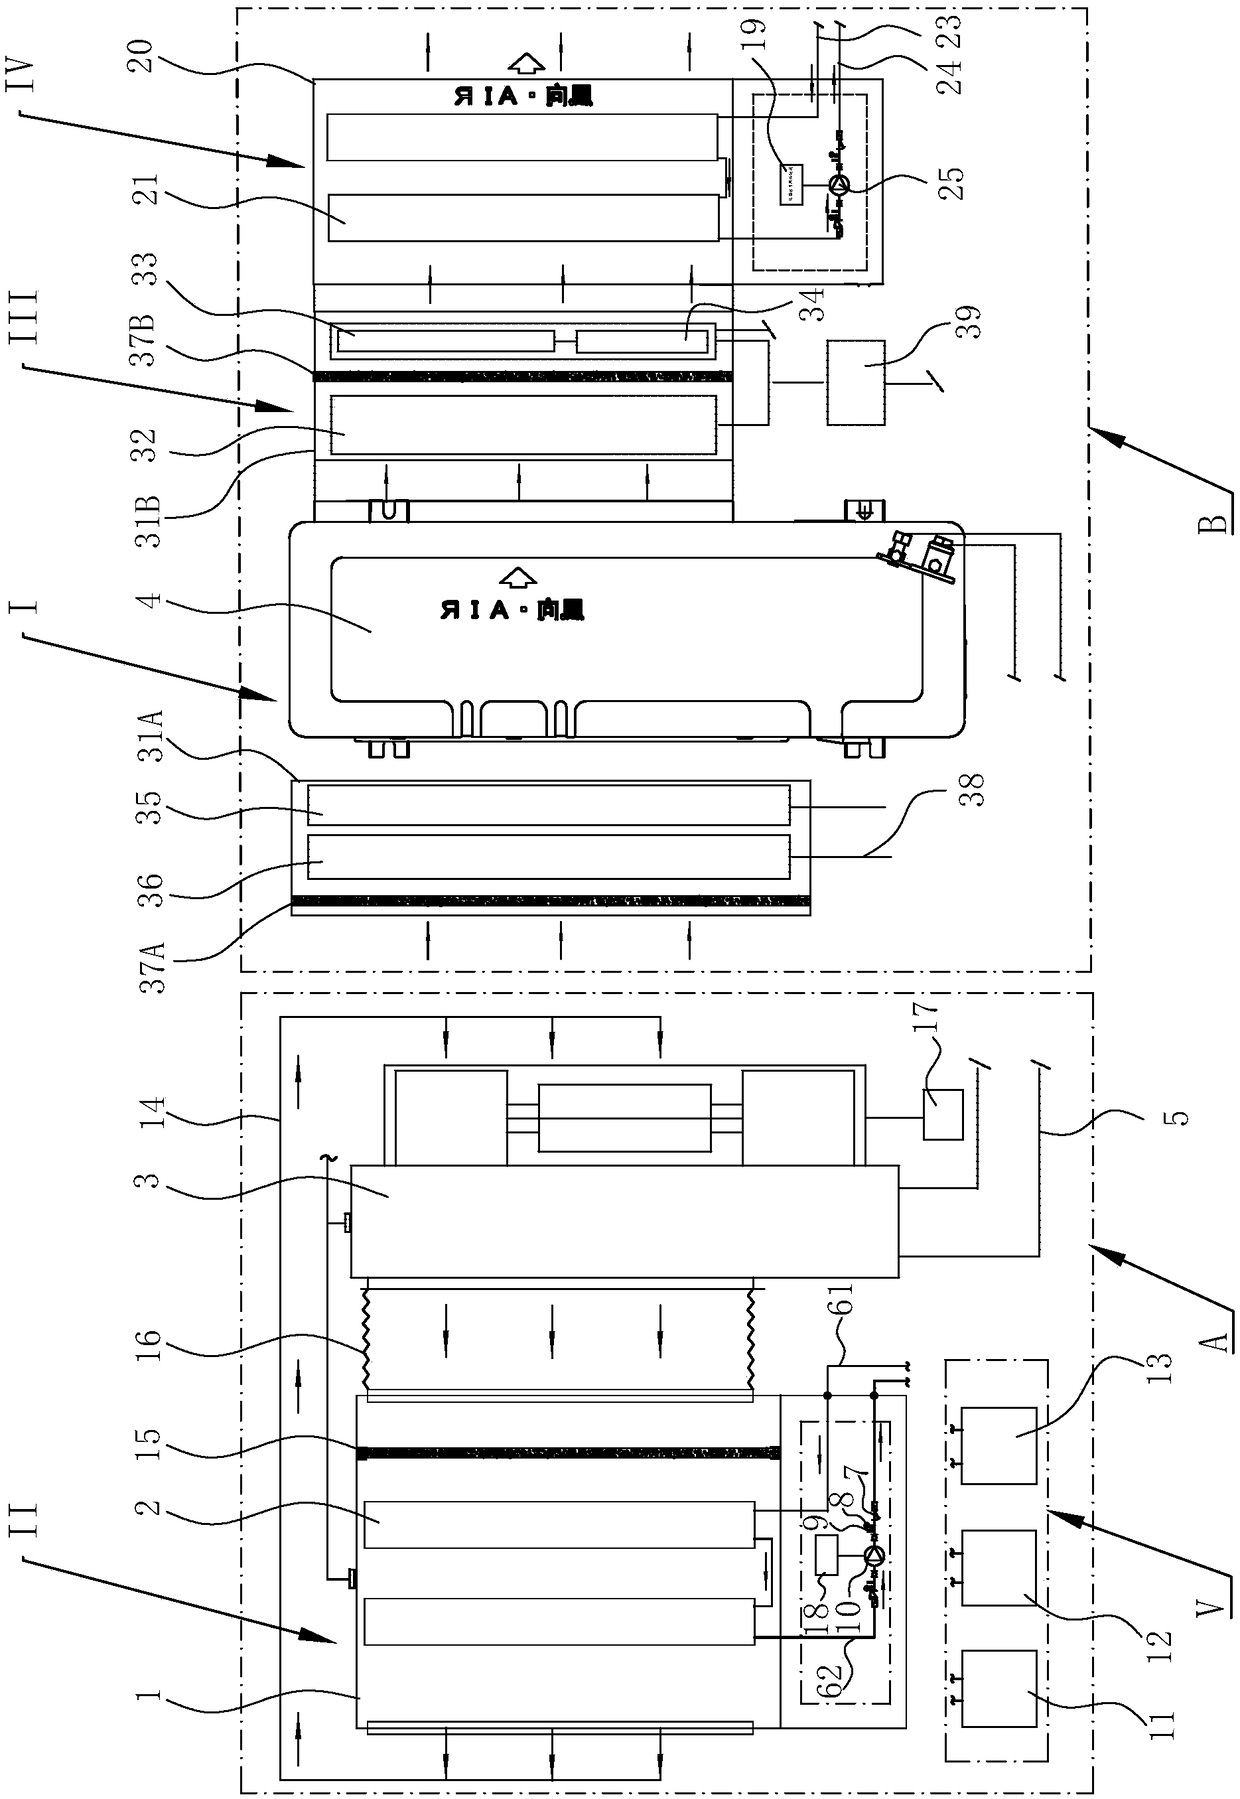 Full-efficiency combined air source heat pump system